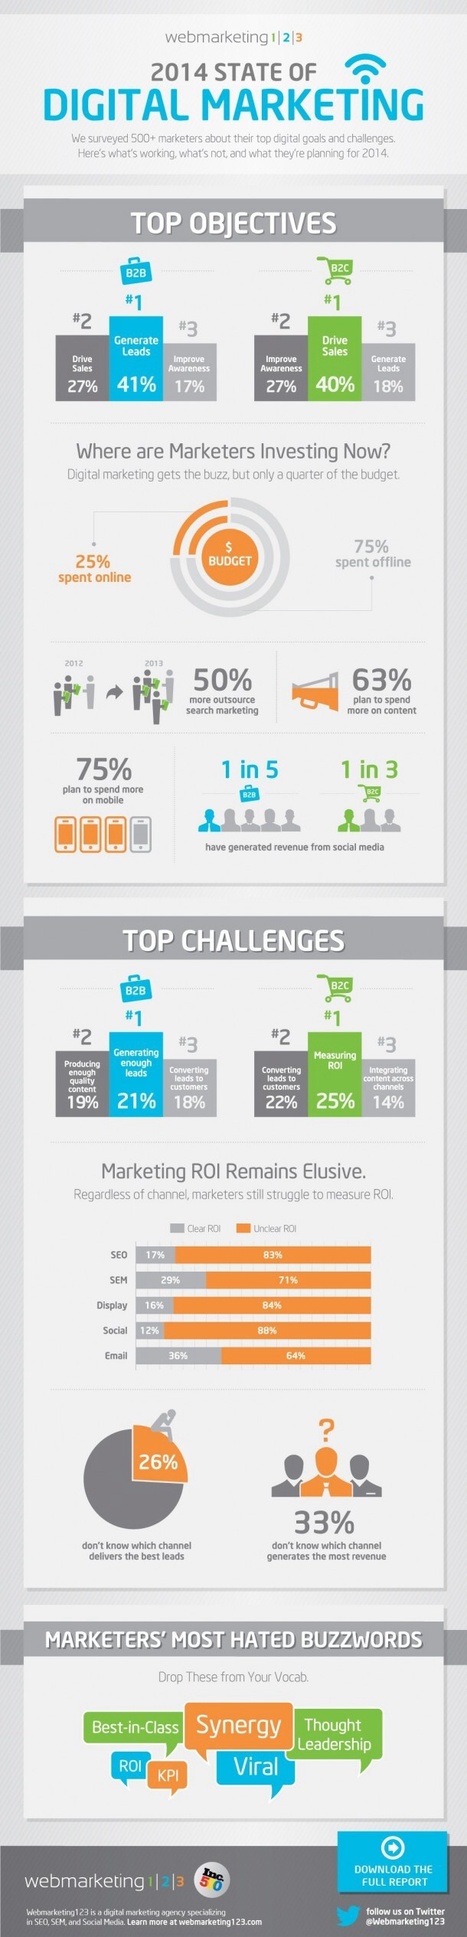 Marketers reveal top digital objectives for 2014 #infographic | Power of Content Curation | Scoop.it